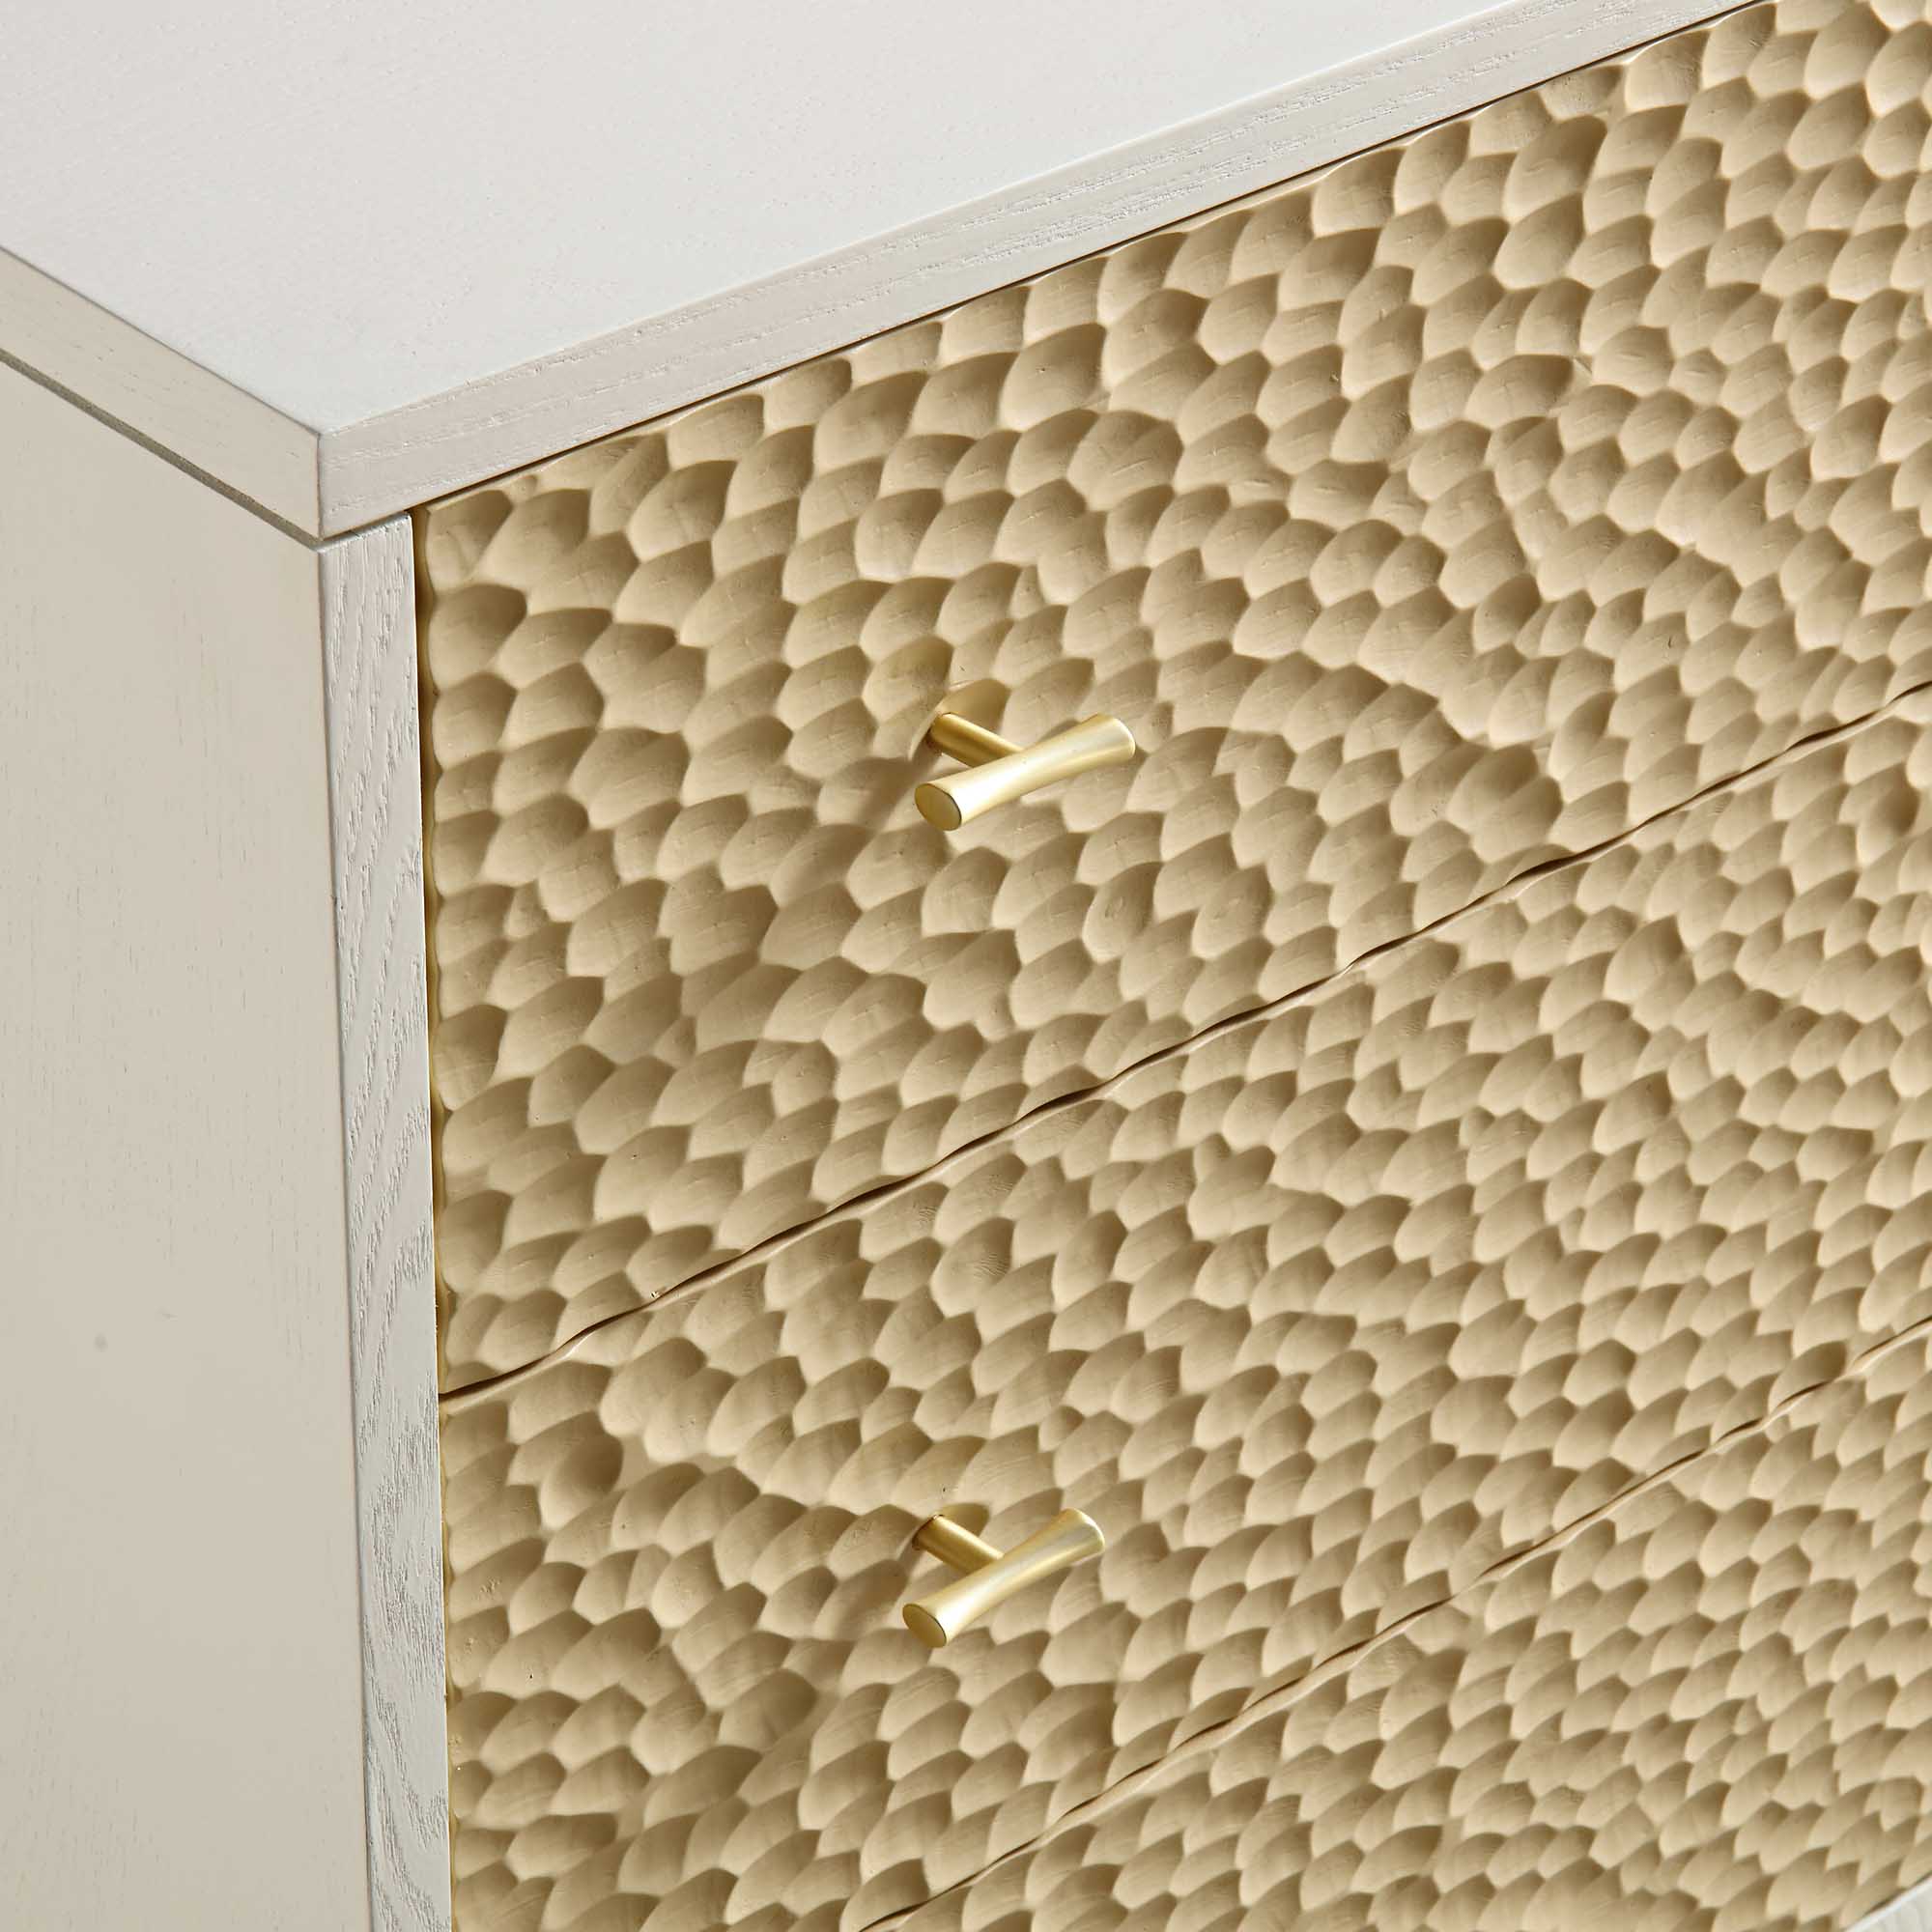 Bianca Chip Carved 3 Drawer Chest, Sand Beige & Ivory